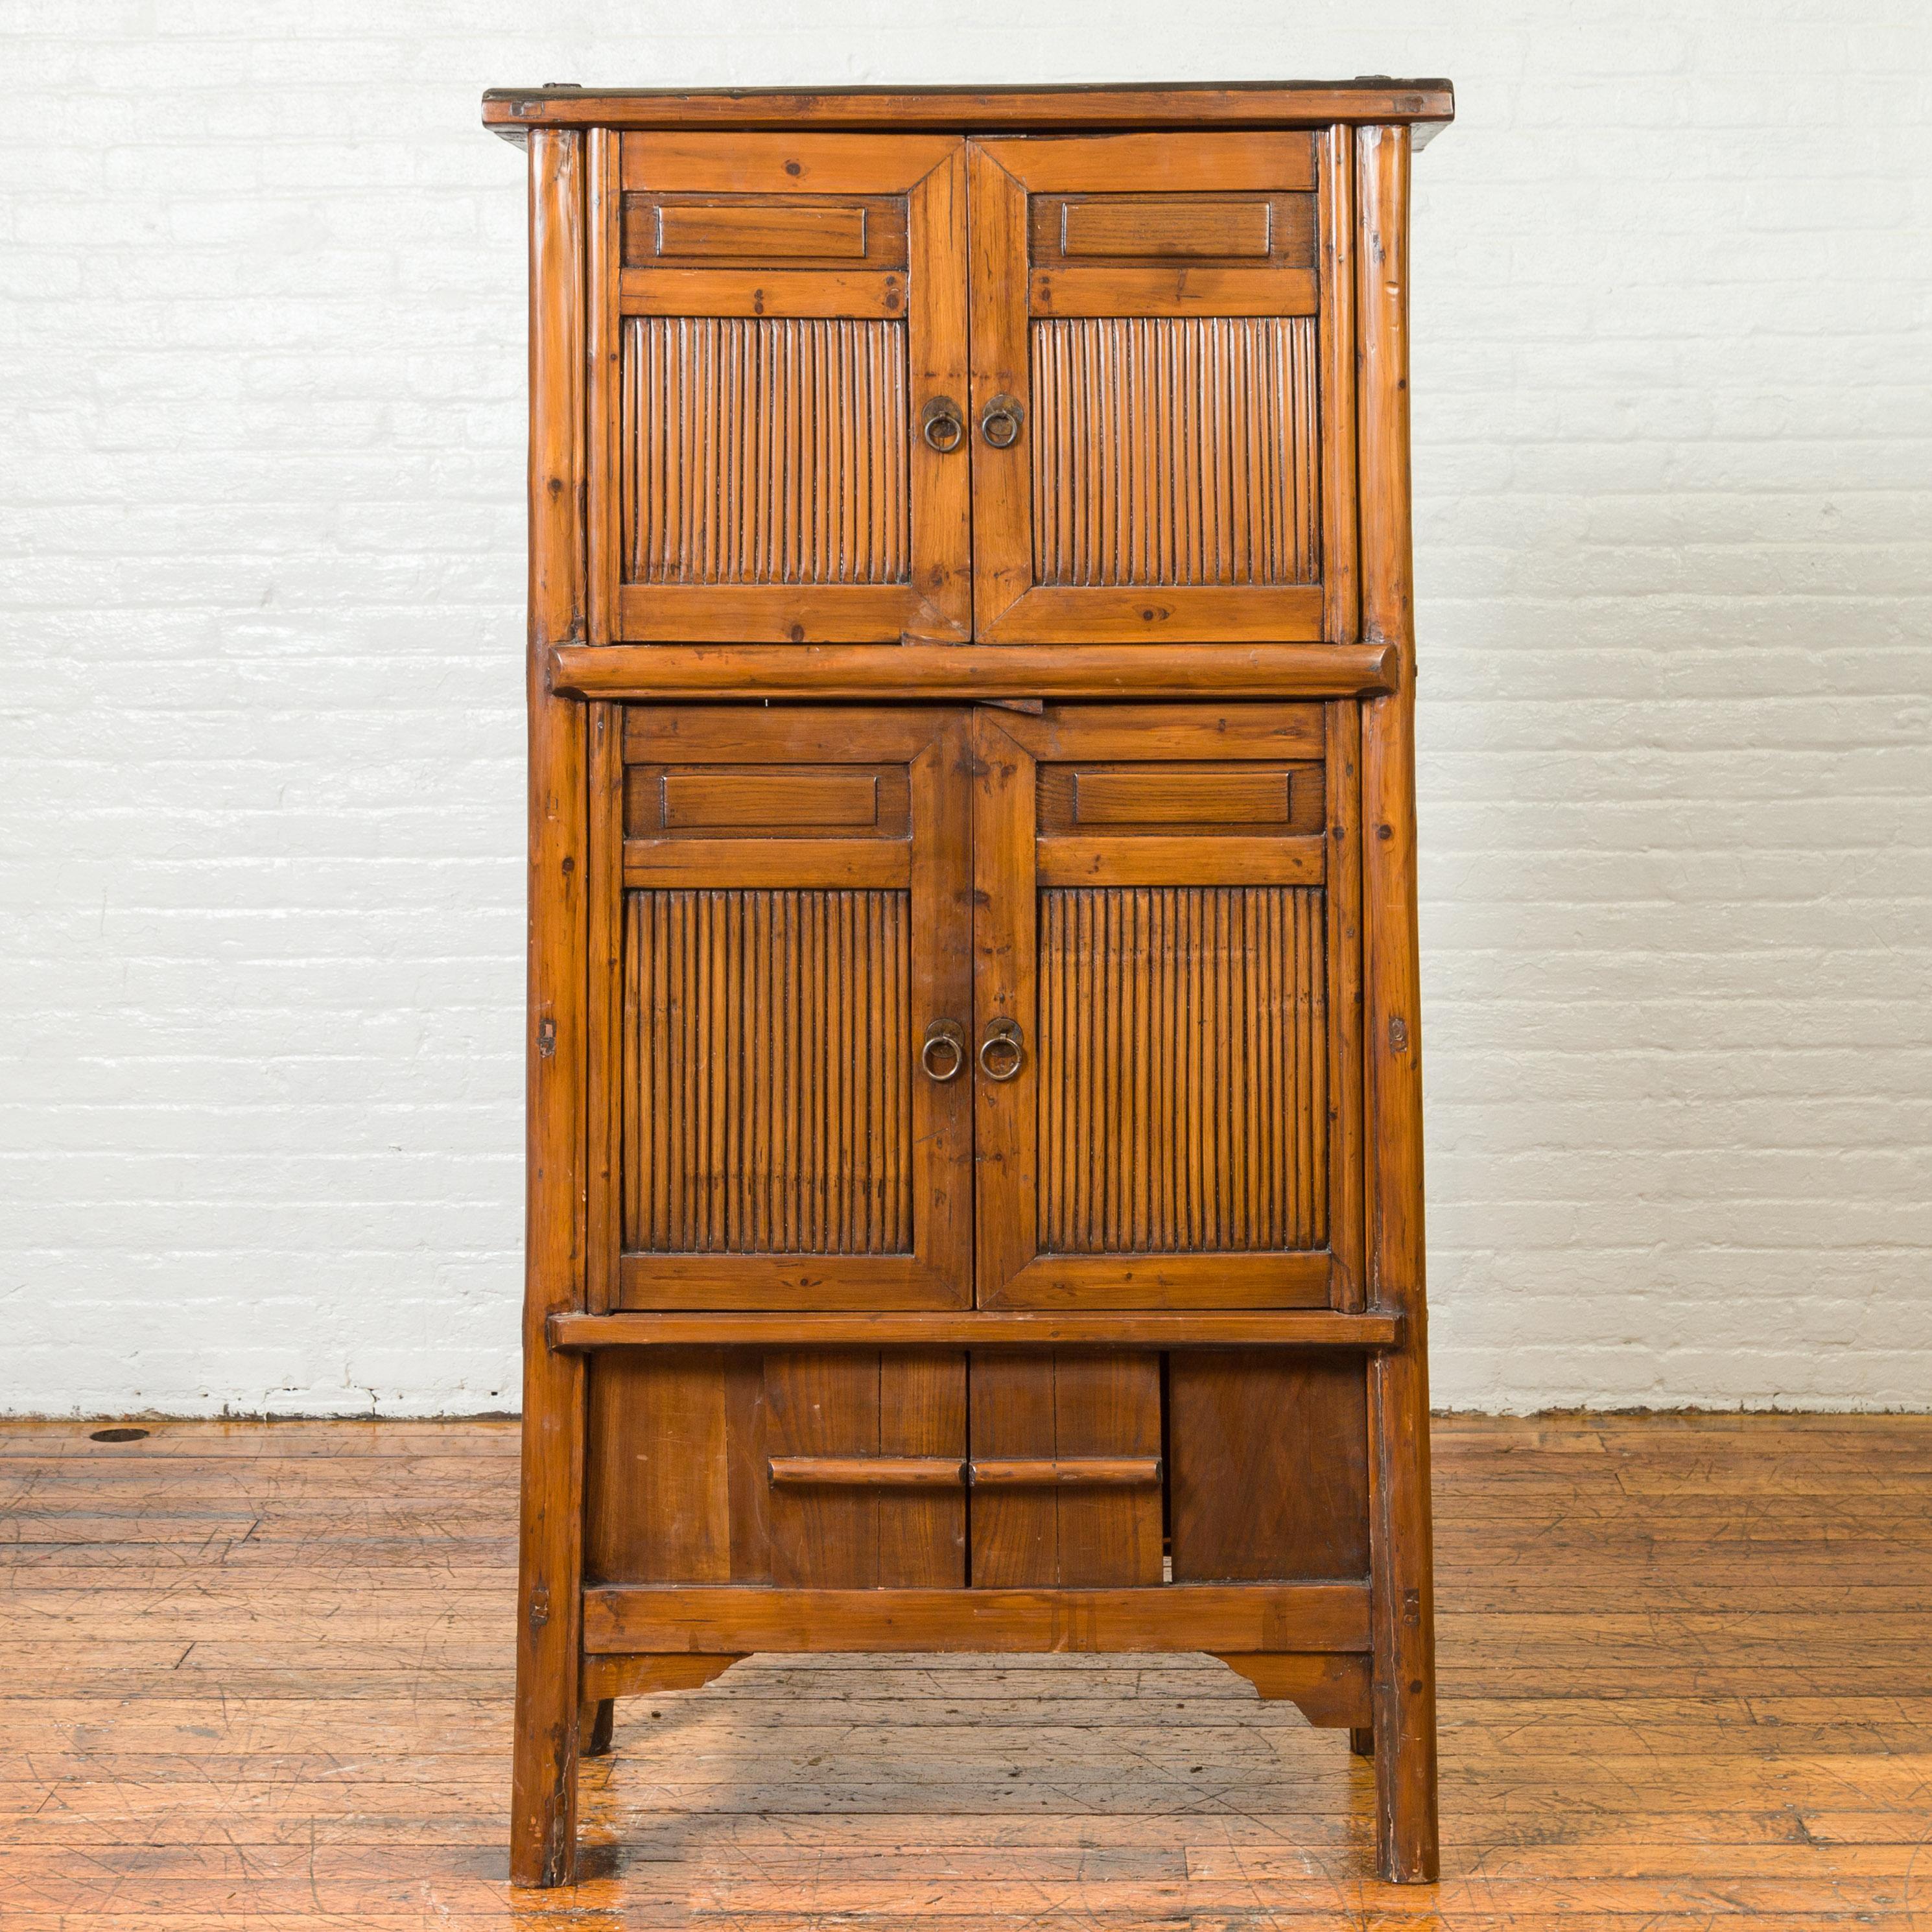 An antique Chinese Qing Dynasty period kitchen cabinet from the 19th century with bamboo, two pairs of double doors and sliding panels. Created in China during the Qing Dynasty, this bamboo kitchen cabinet features a flaring silhouette showcasing